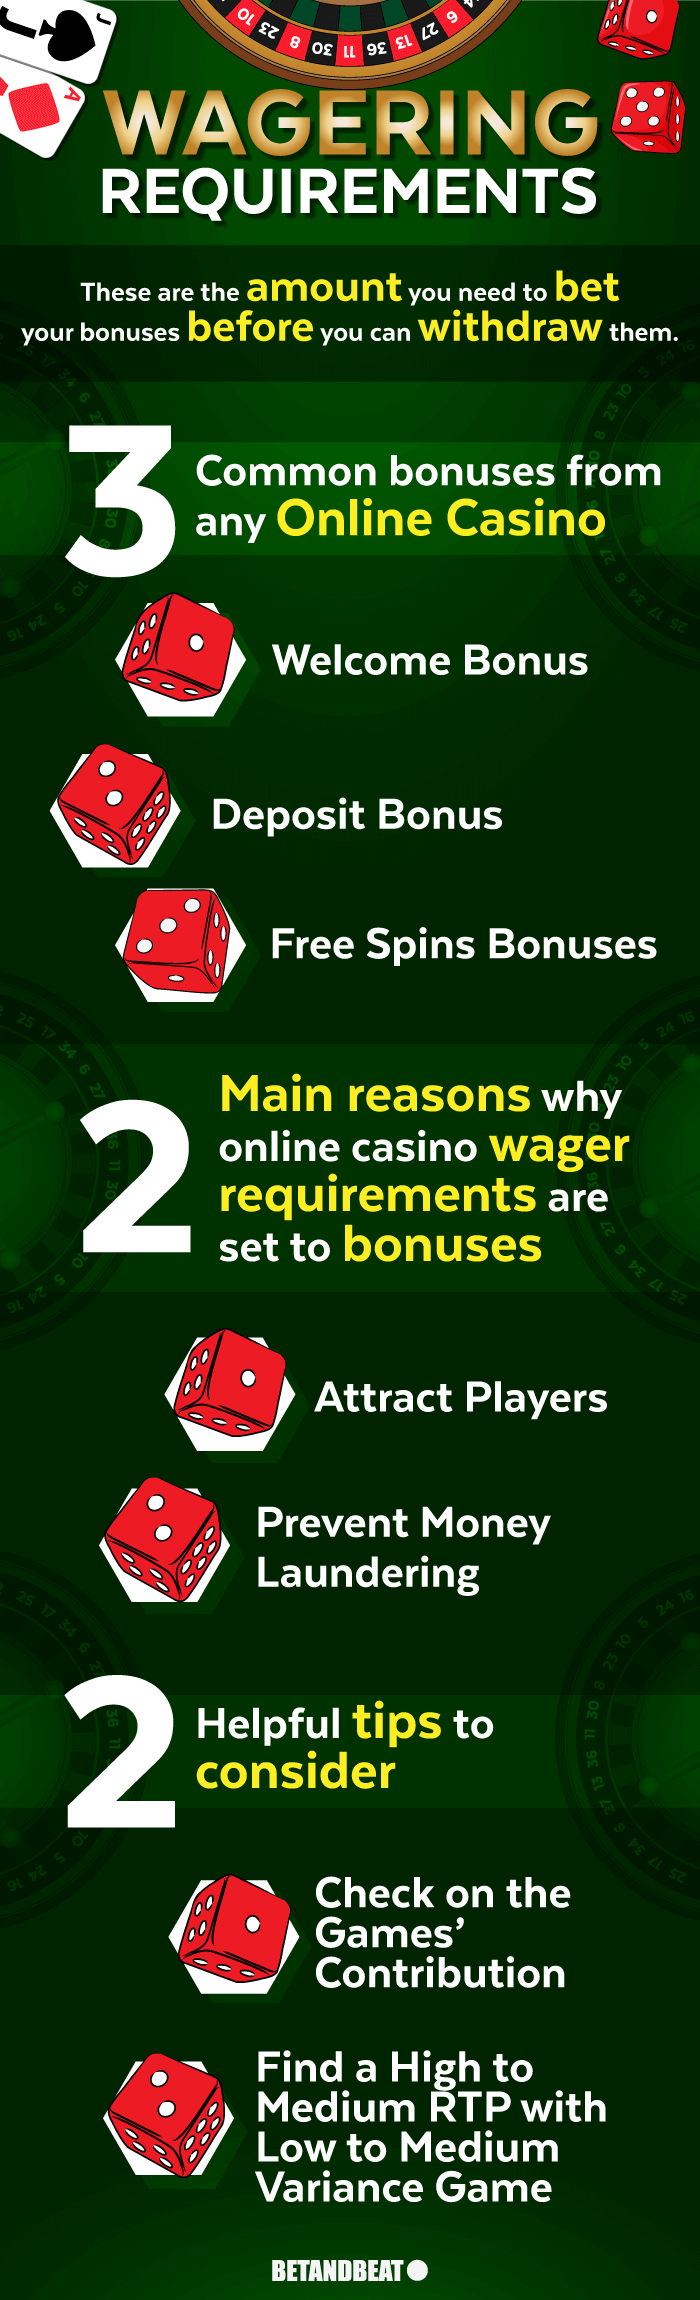 Are There Wagering Requirements for Bonuses?